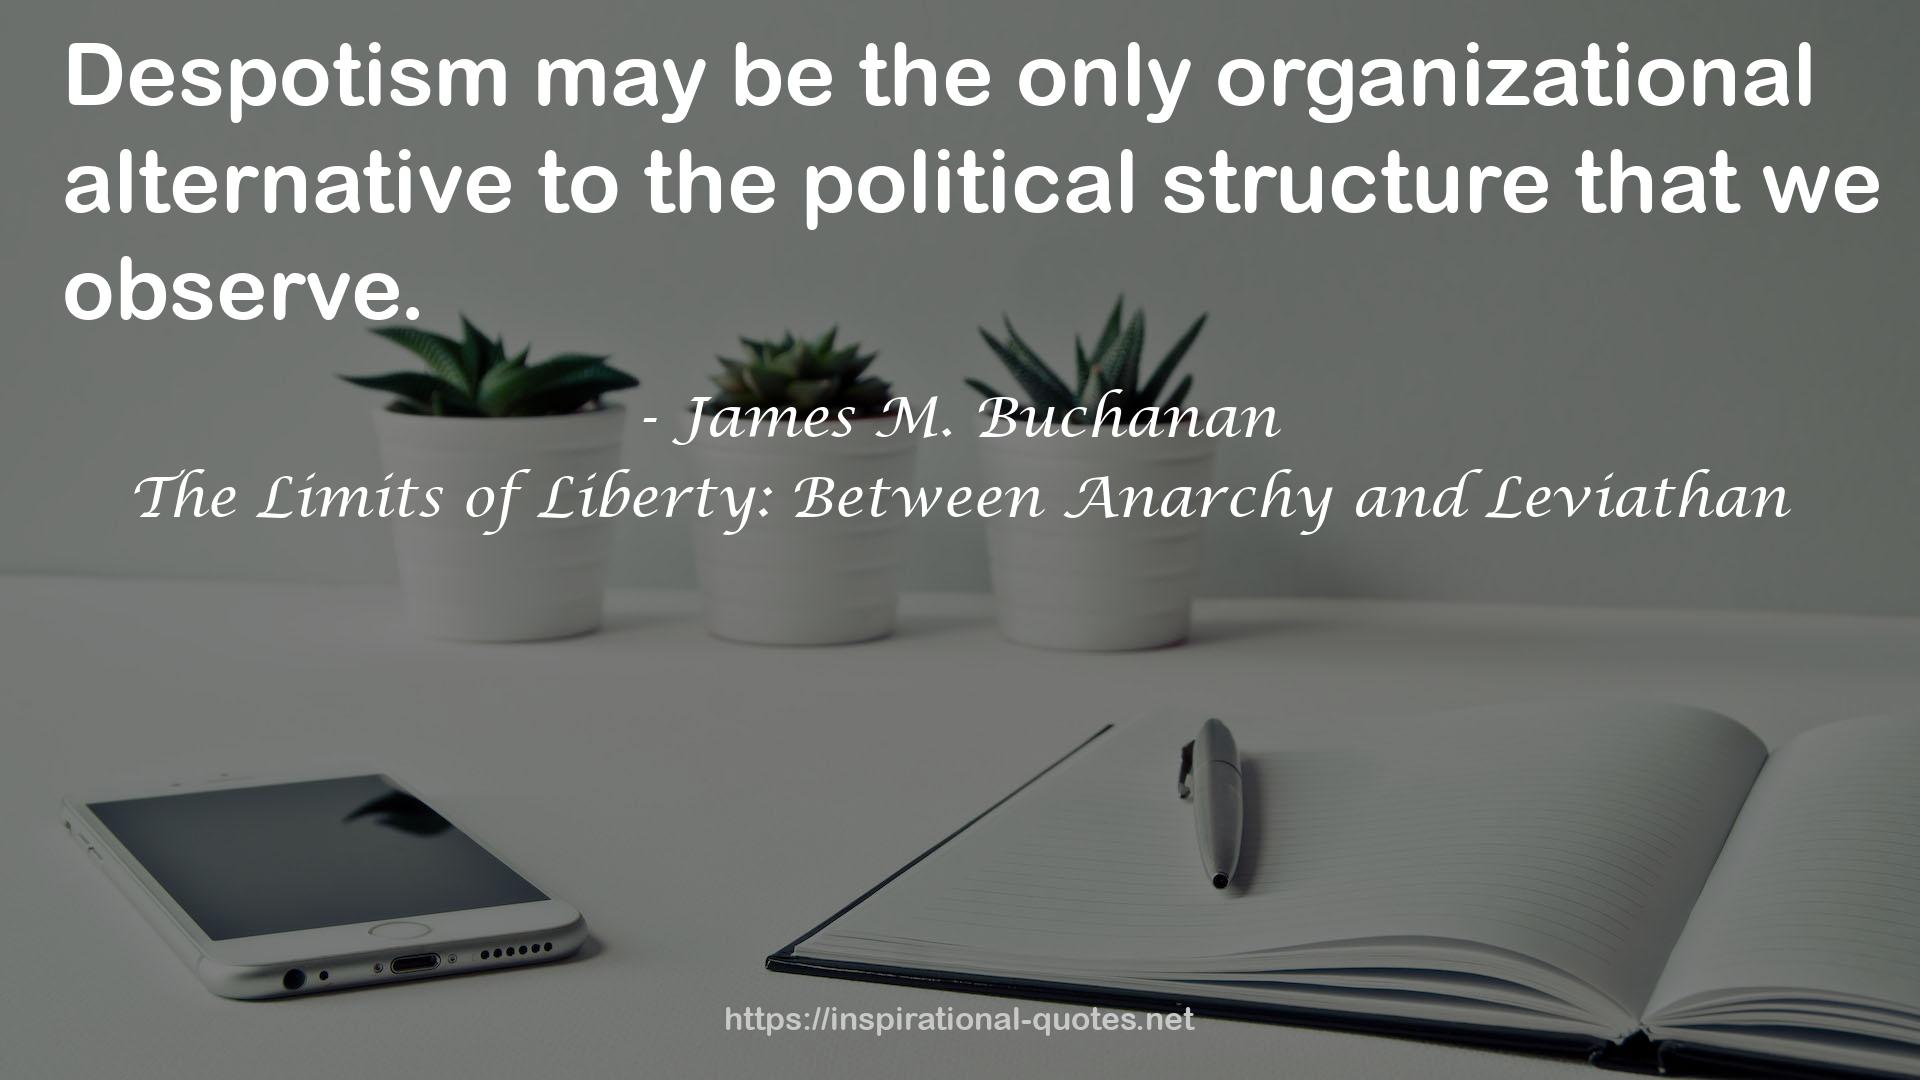 The Limits of Liberty: Between Anarchy and Leviathan QUOTES